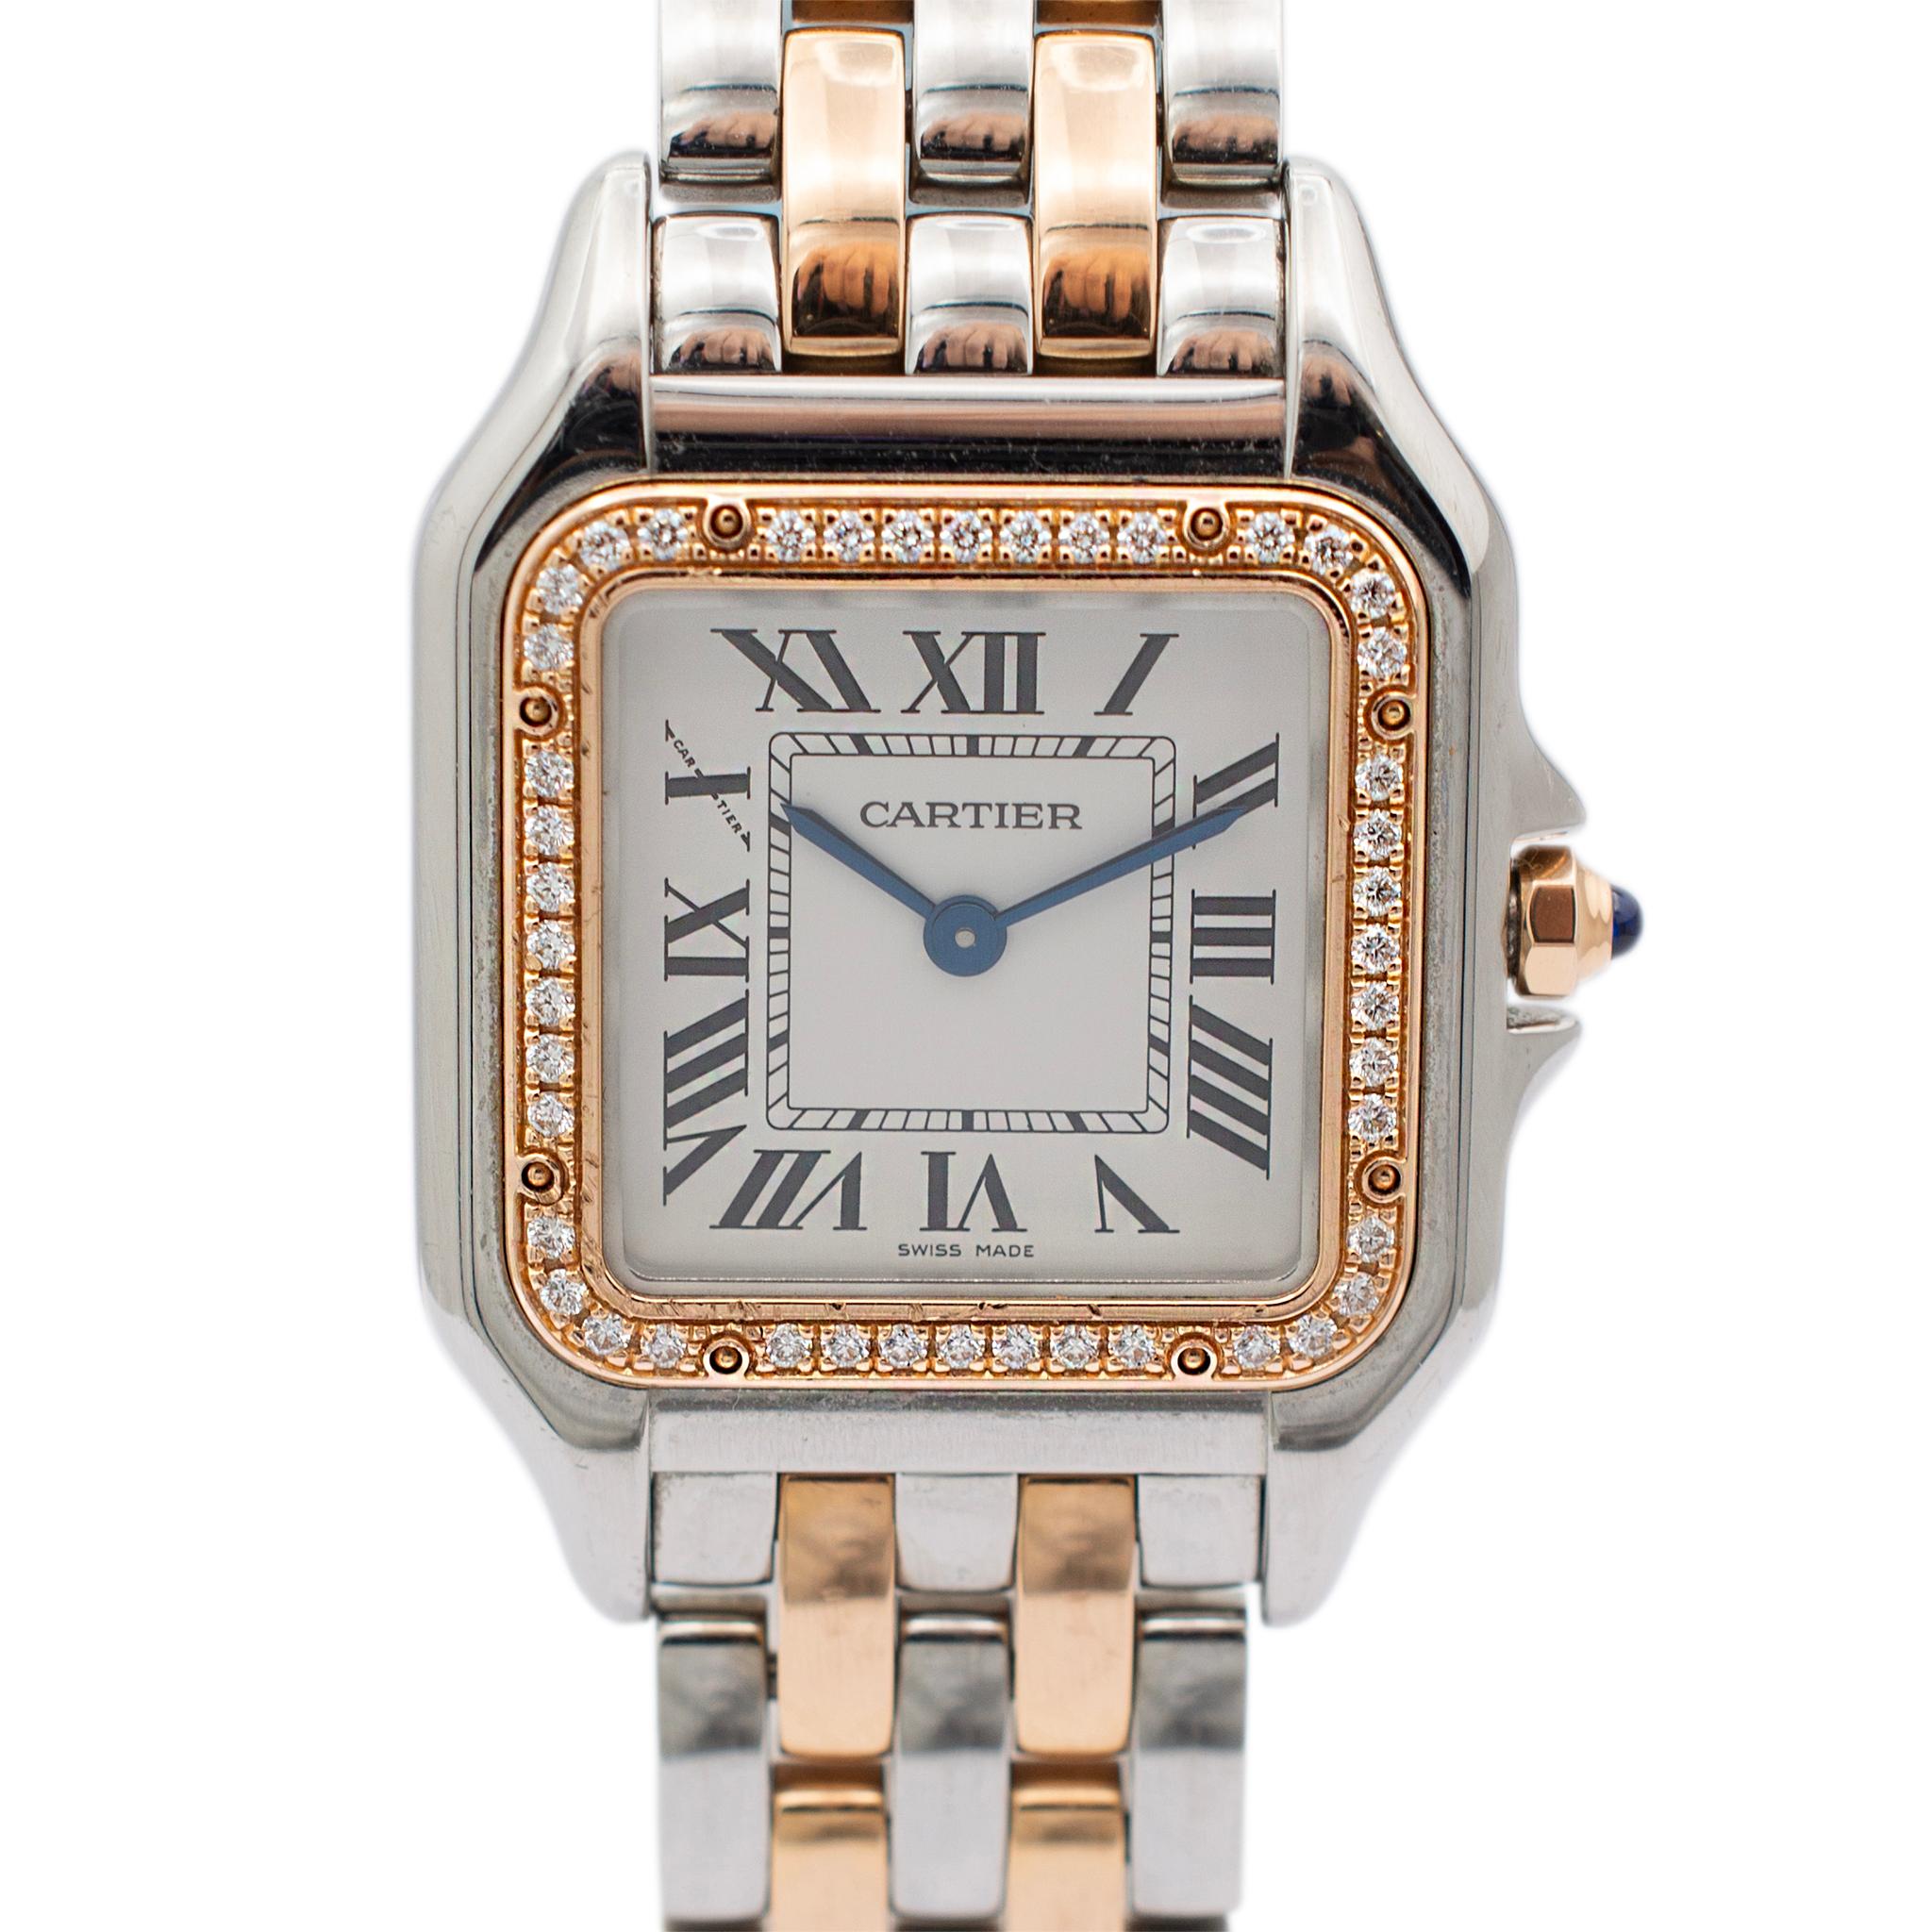 Gender: Ladies

Metal Type: 18K Rose Gold and Stainless Steel

Length: 5.50 inches

Weight: 73.63 grams

One ladies 18K rose gold and stainless steel, diamond Cartier Swiss made watch with original box. The 